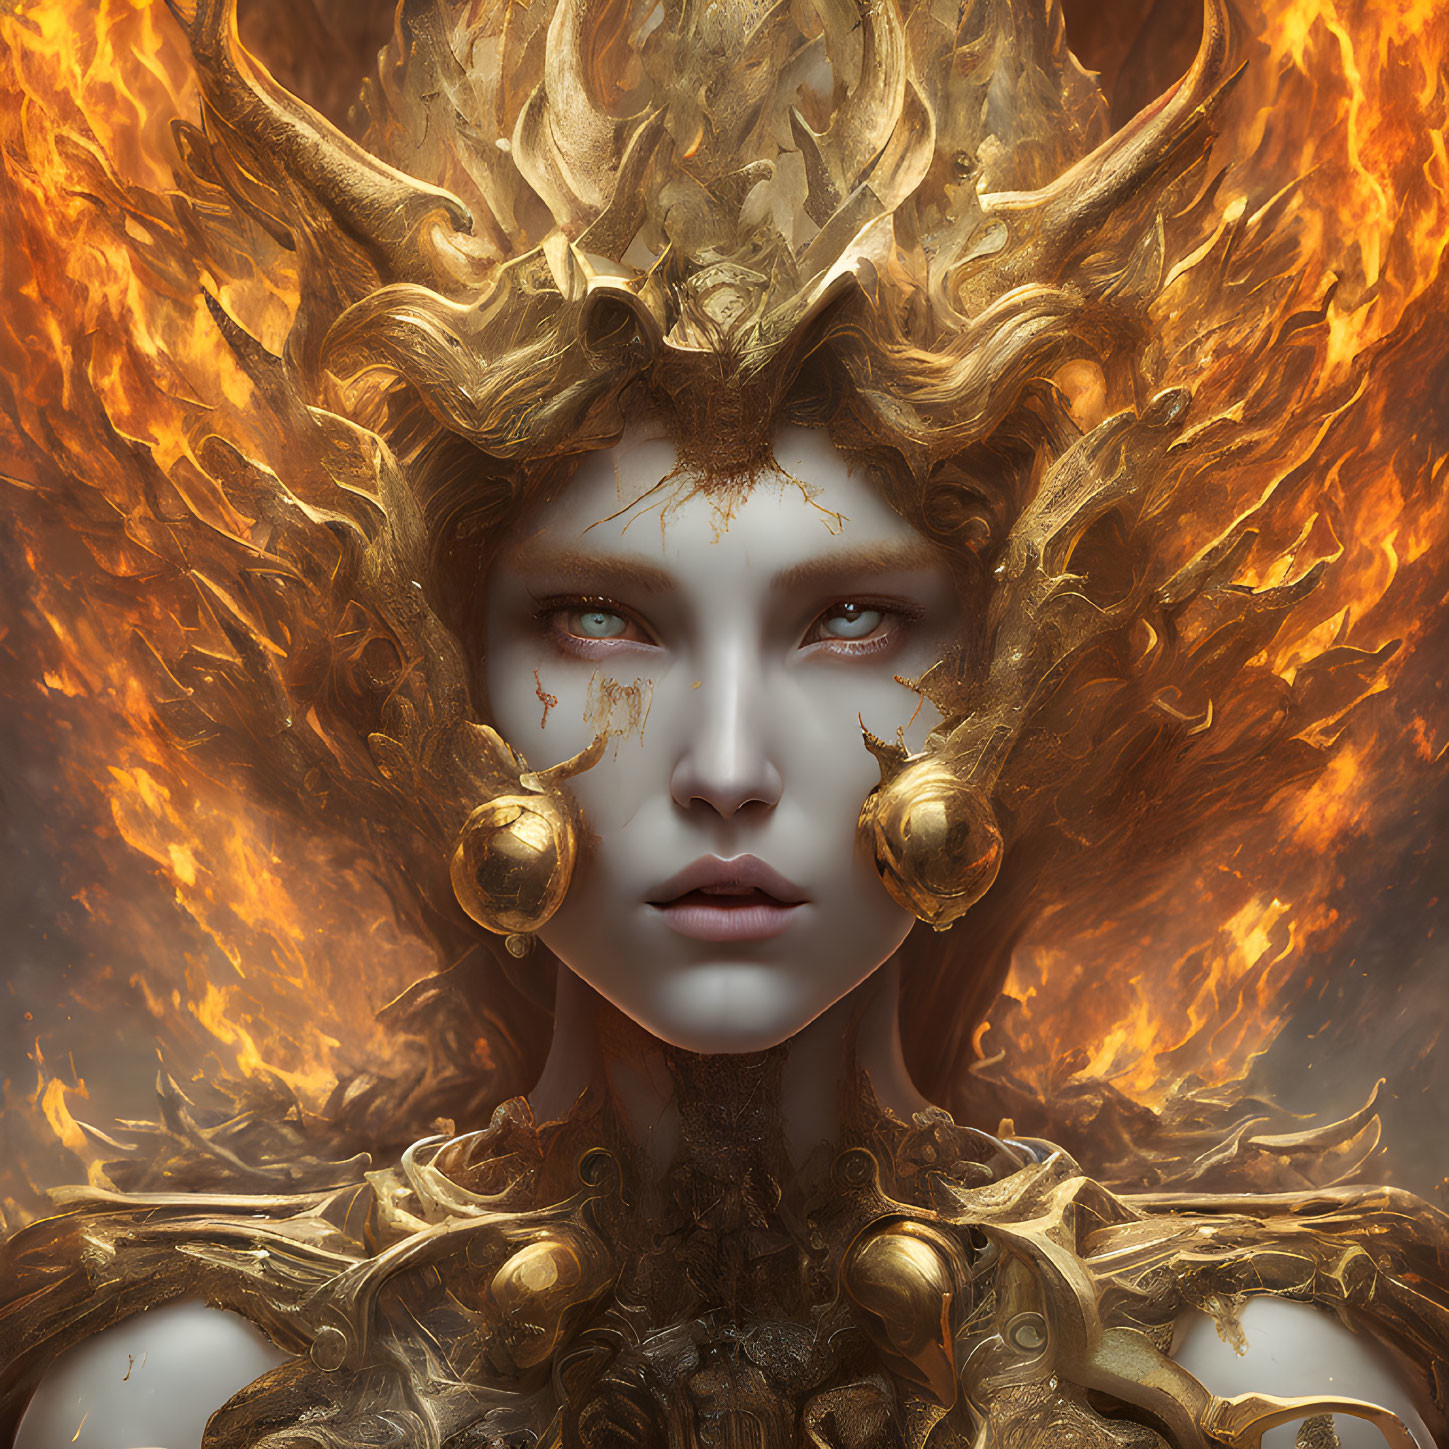 Fantasy portrait of person with golden crown-like headgear and fiery background